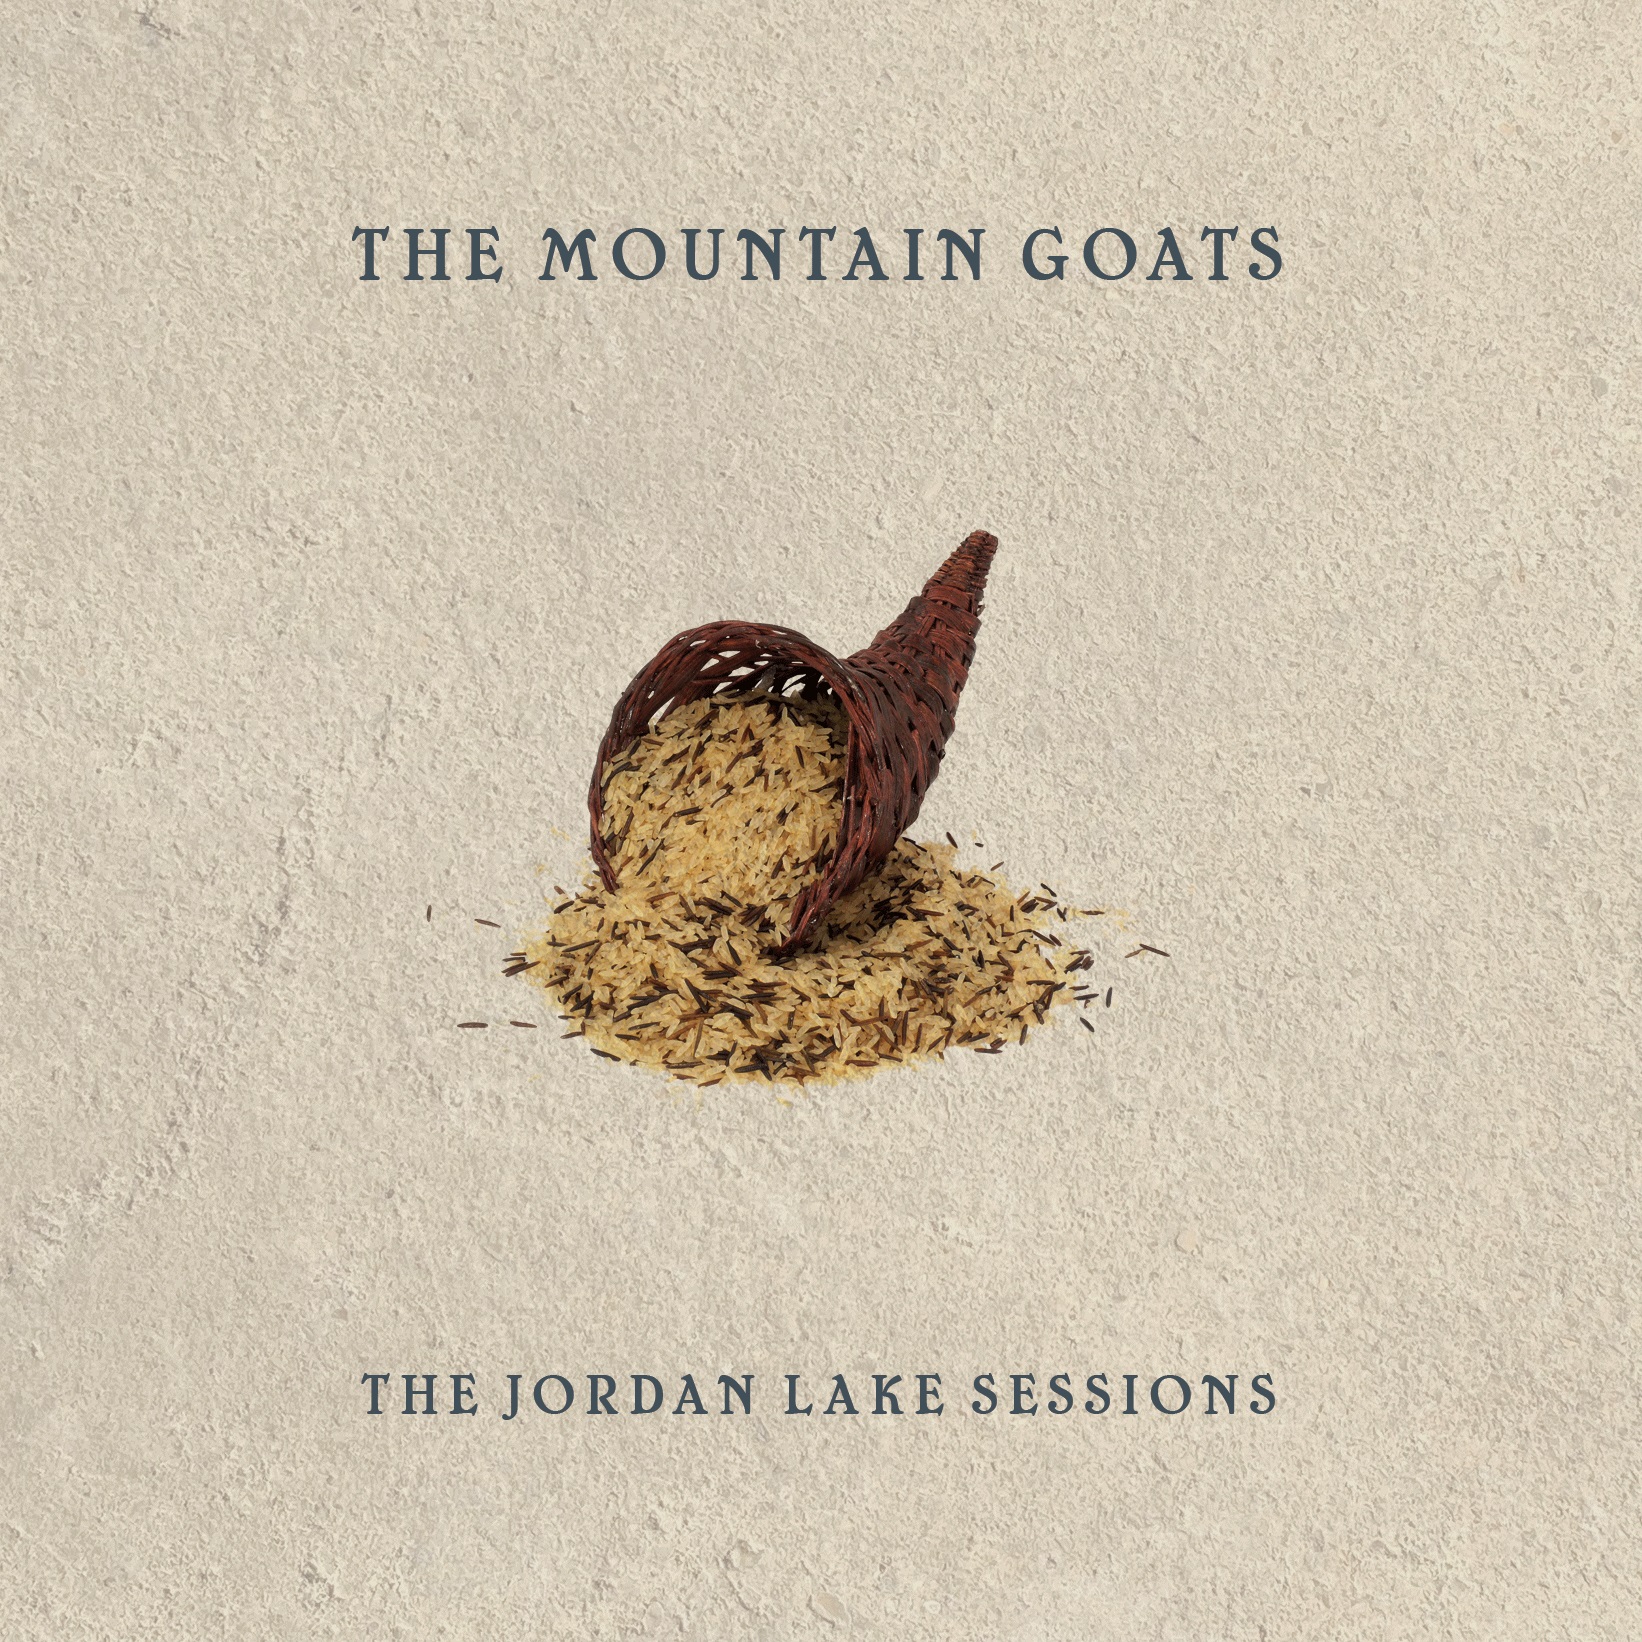 The Mountain Goats - The Jordan Lake Sessions: Volumes 1 and 2 (2020) [FLAC 24bit/44,1kHz]